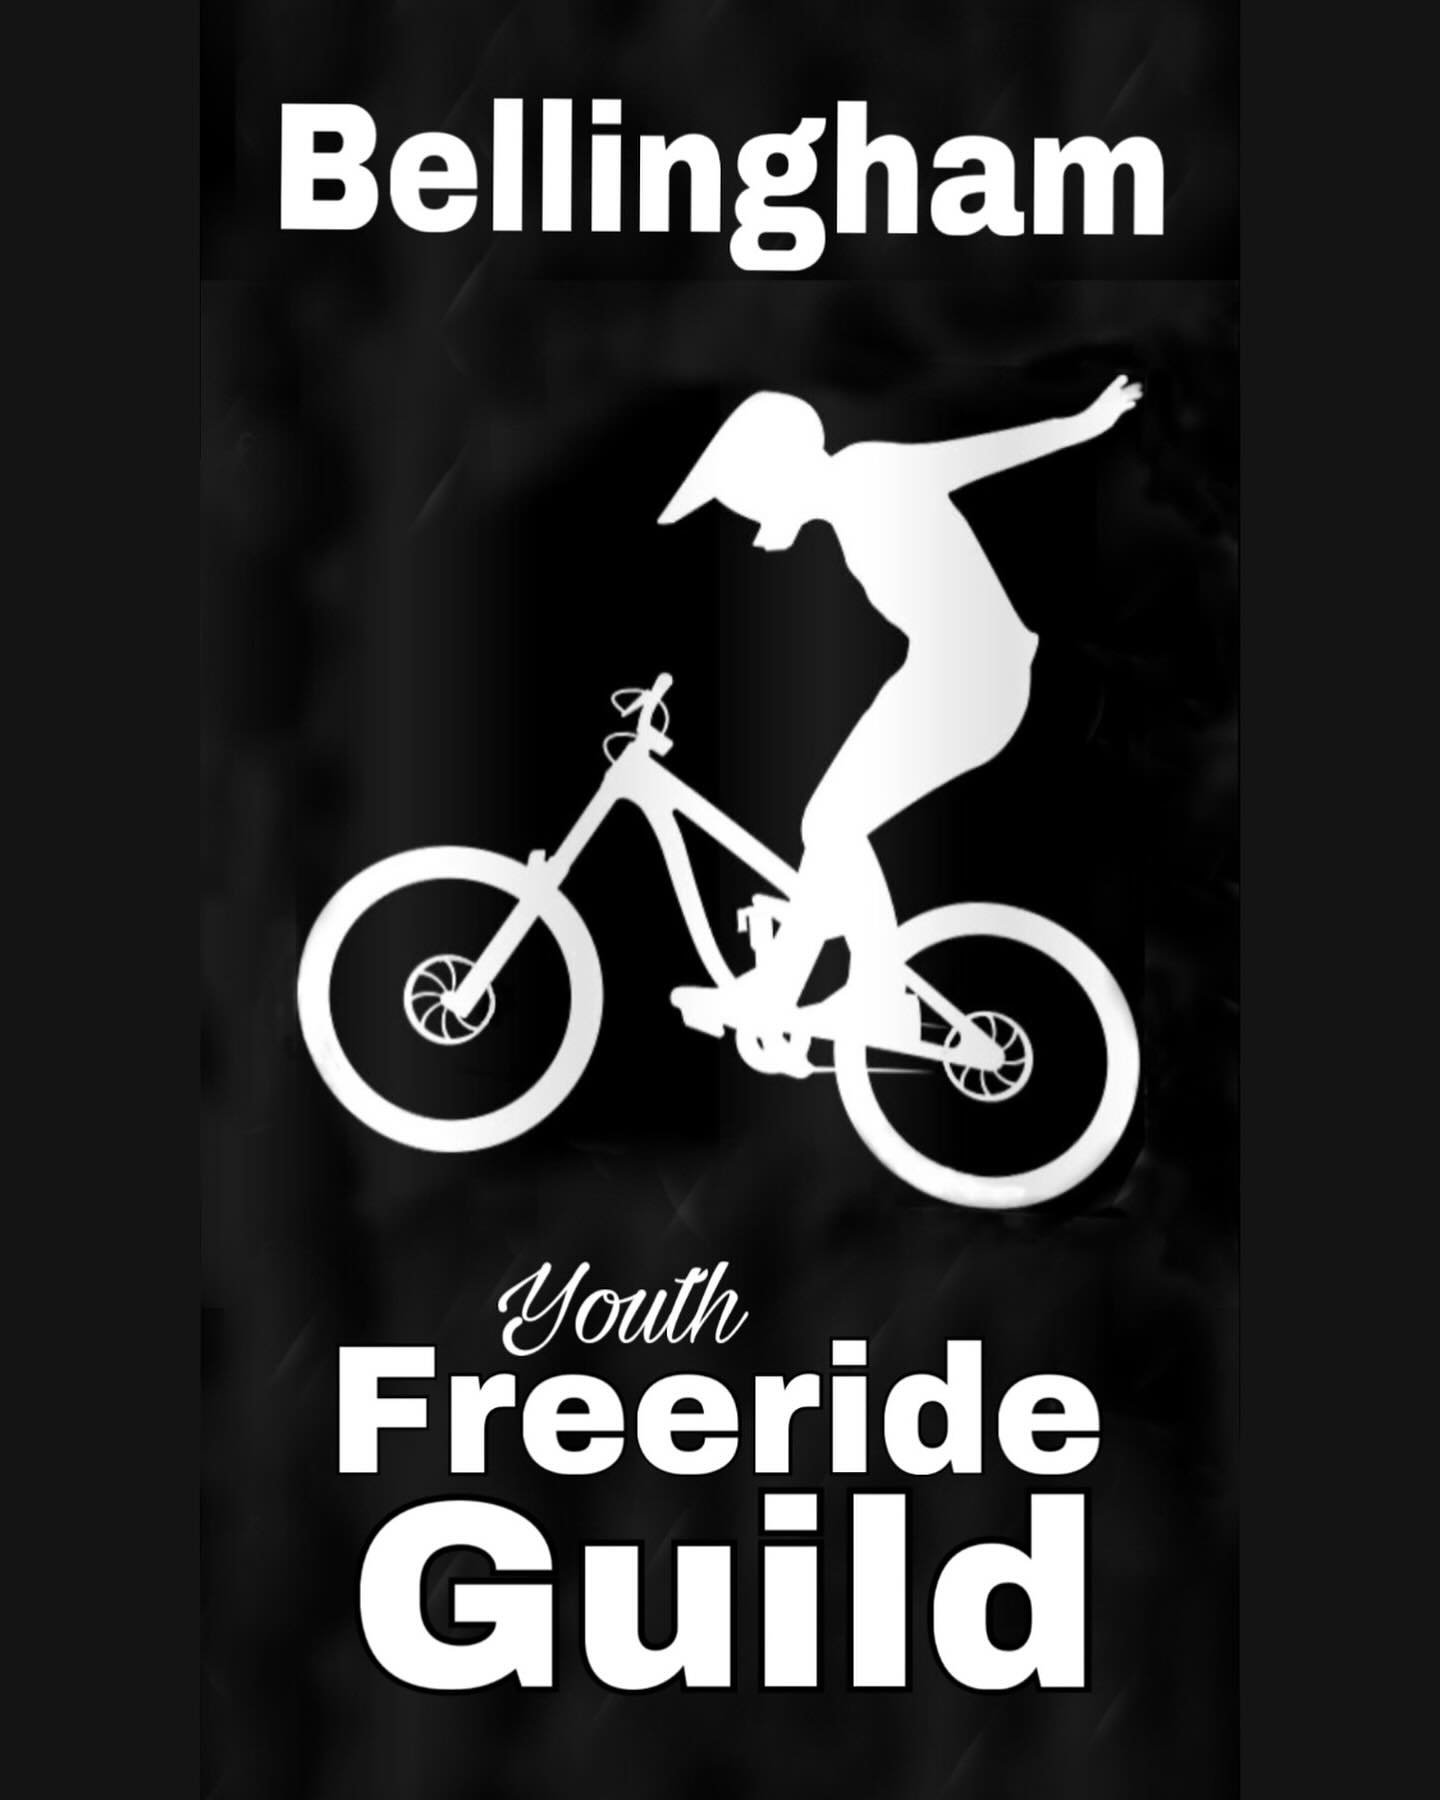 The season is here. And Youth Freeride Guild is about to begin! If you have a child age 10 to 14 who likes being in the air and wants to ride with more flow and style, check out Youth Freeride Guild. We have sessons starting this month. 

Kids will s